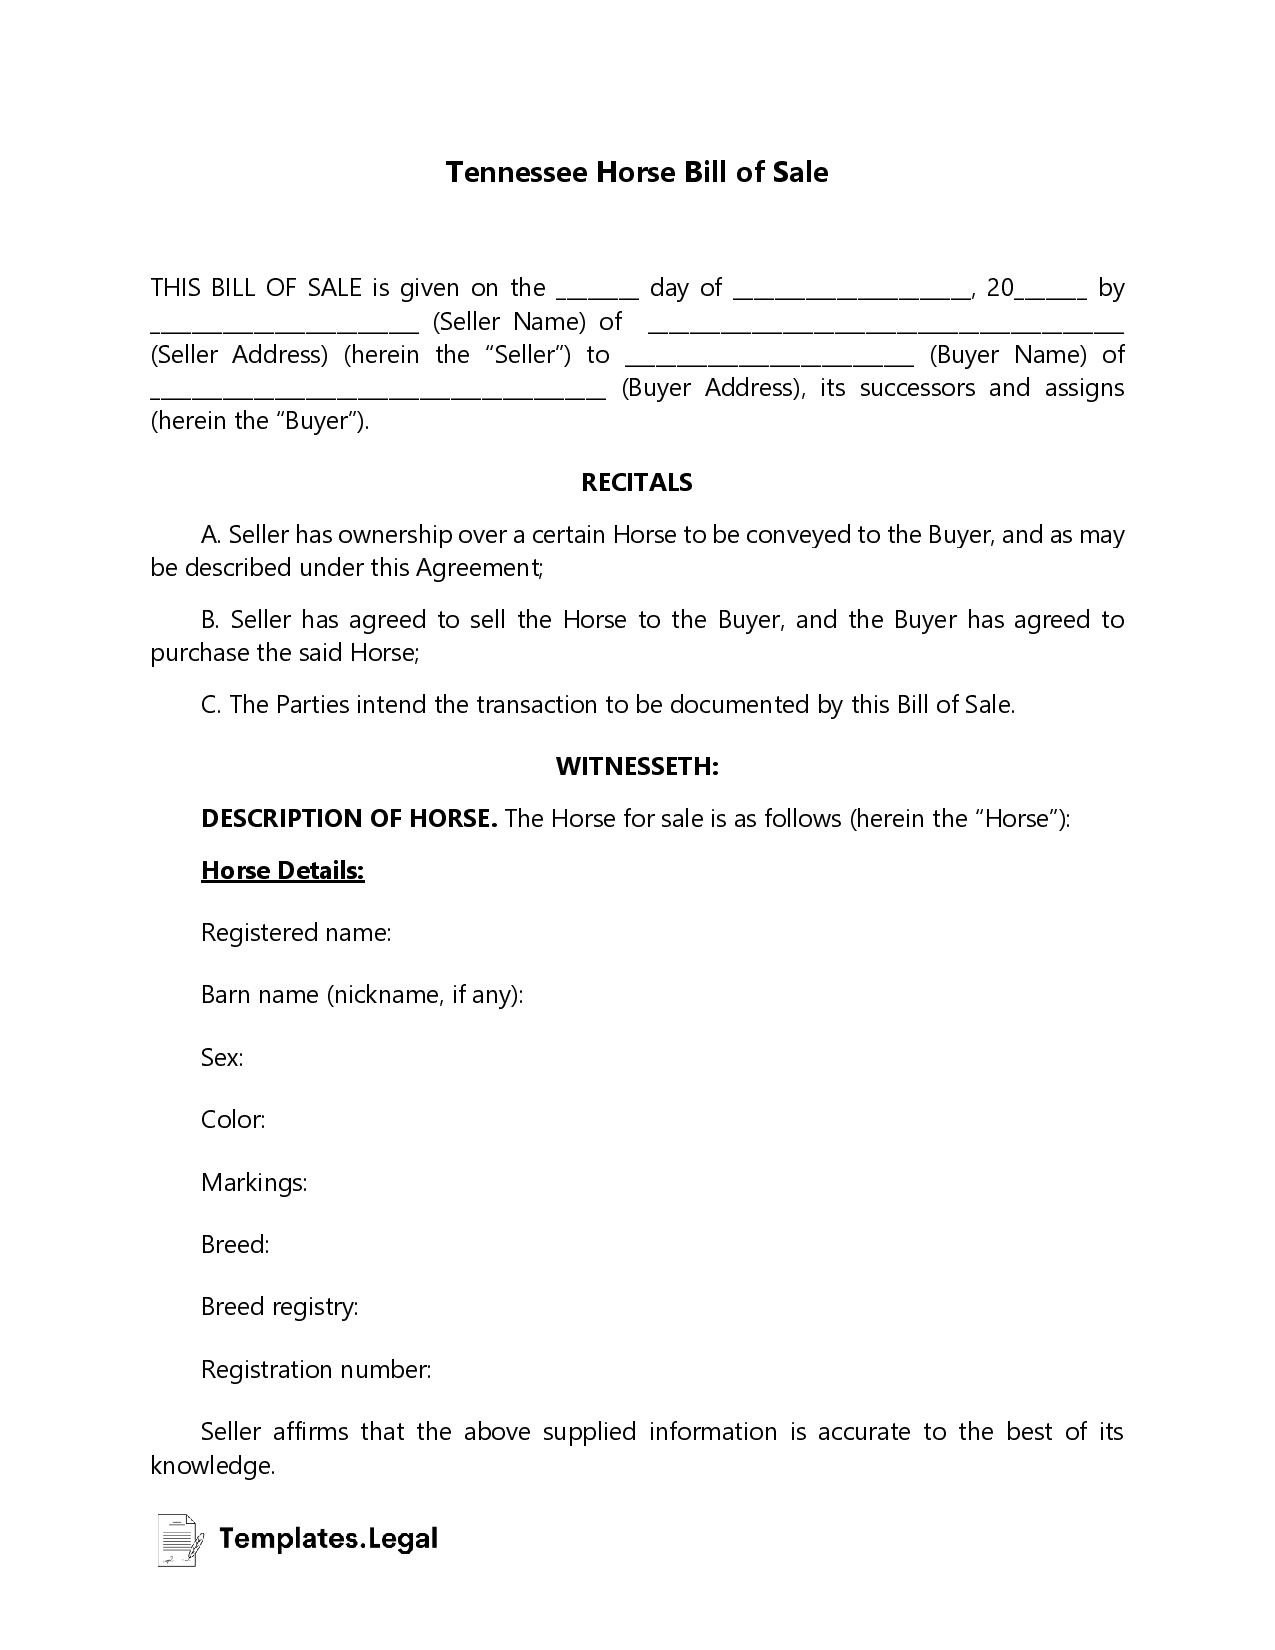 Tennessee Horse Bill of Sale - Templates.Legal